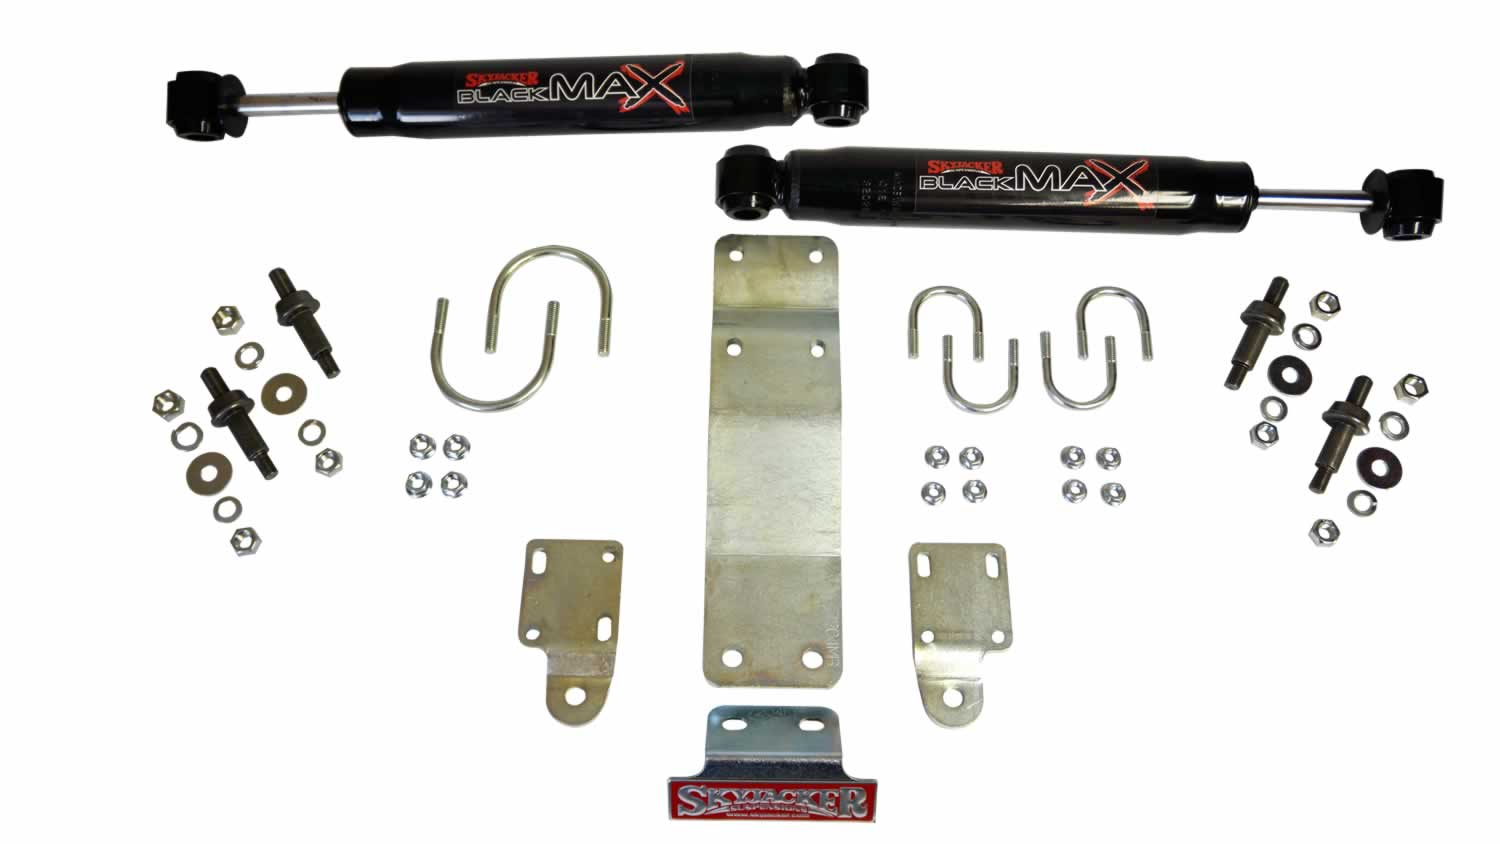 Dual Black MAX Stabilizer 2007-2017 for Jeep Wrangler